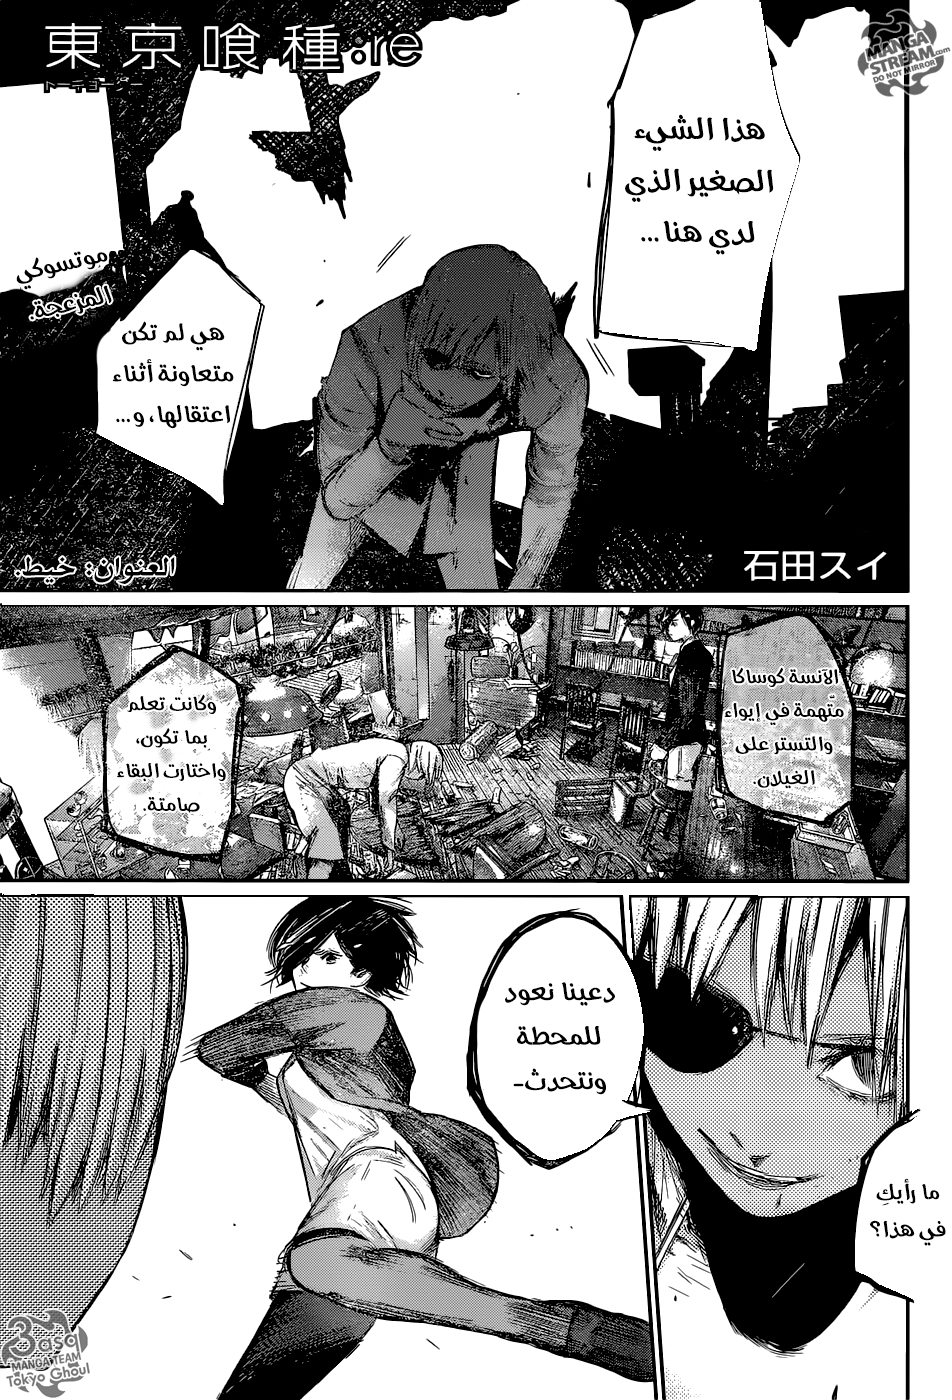 Tokyo Ghoul: Re: Chapter 124 - Page 1